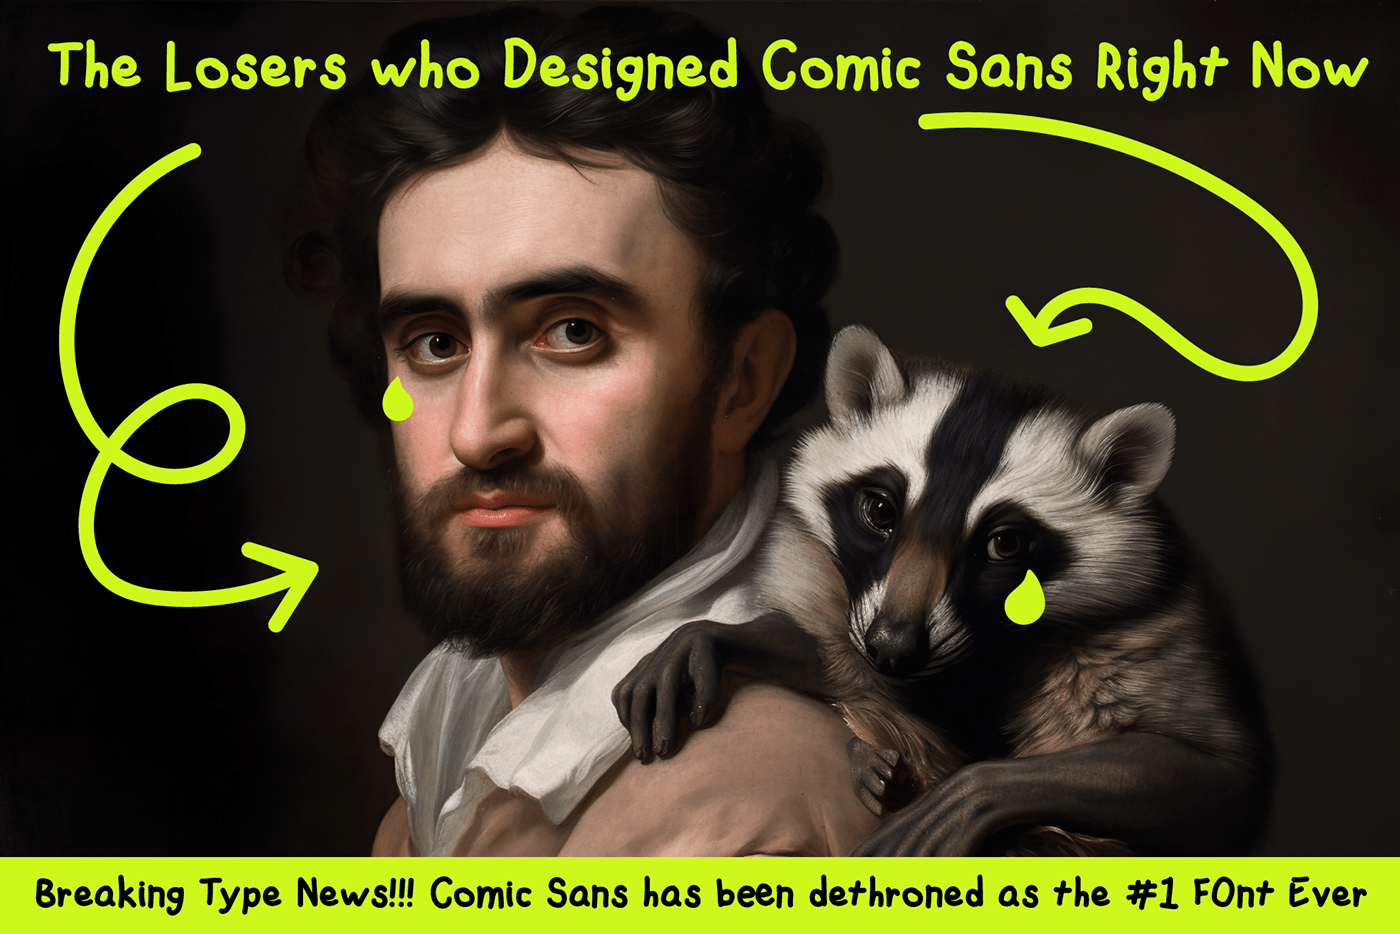 a man and a raccoon cry because they invented comic sans and will no longer be relevant